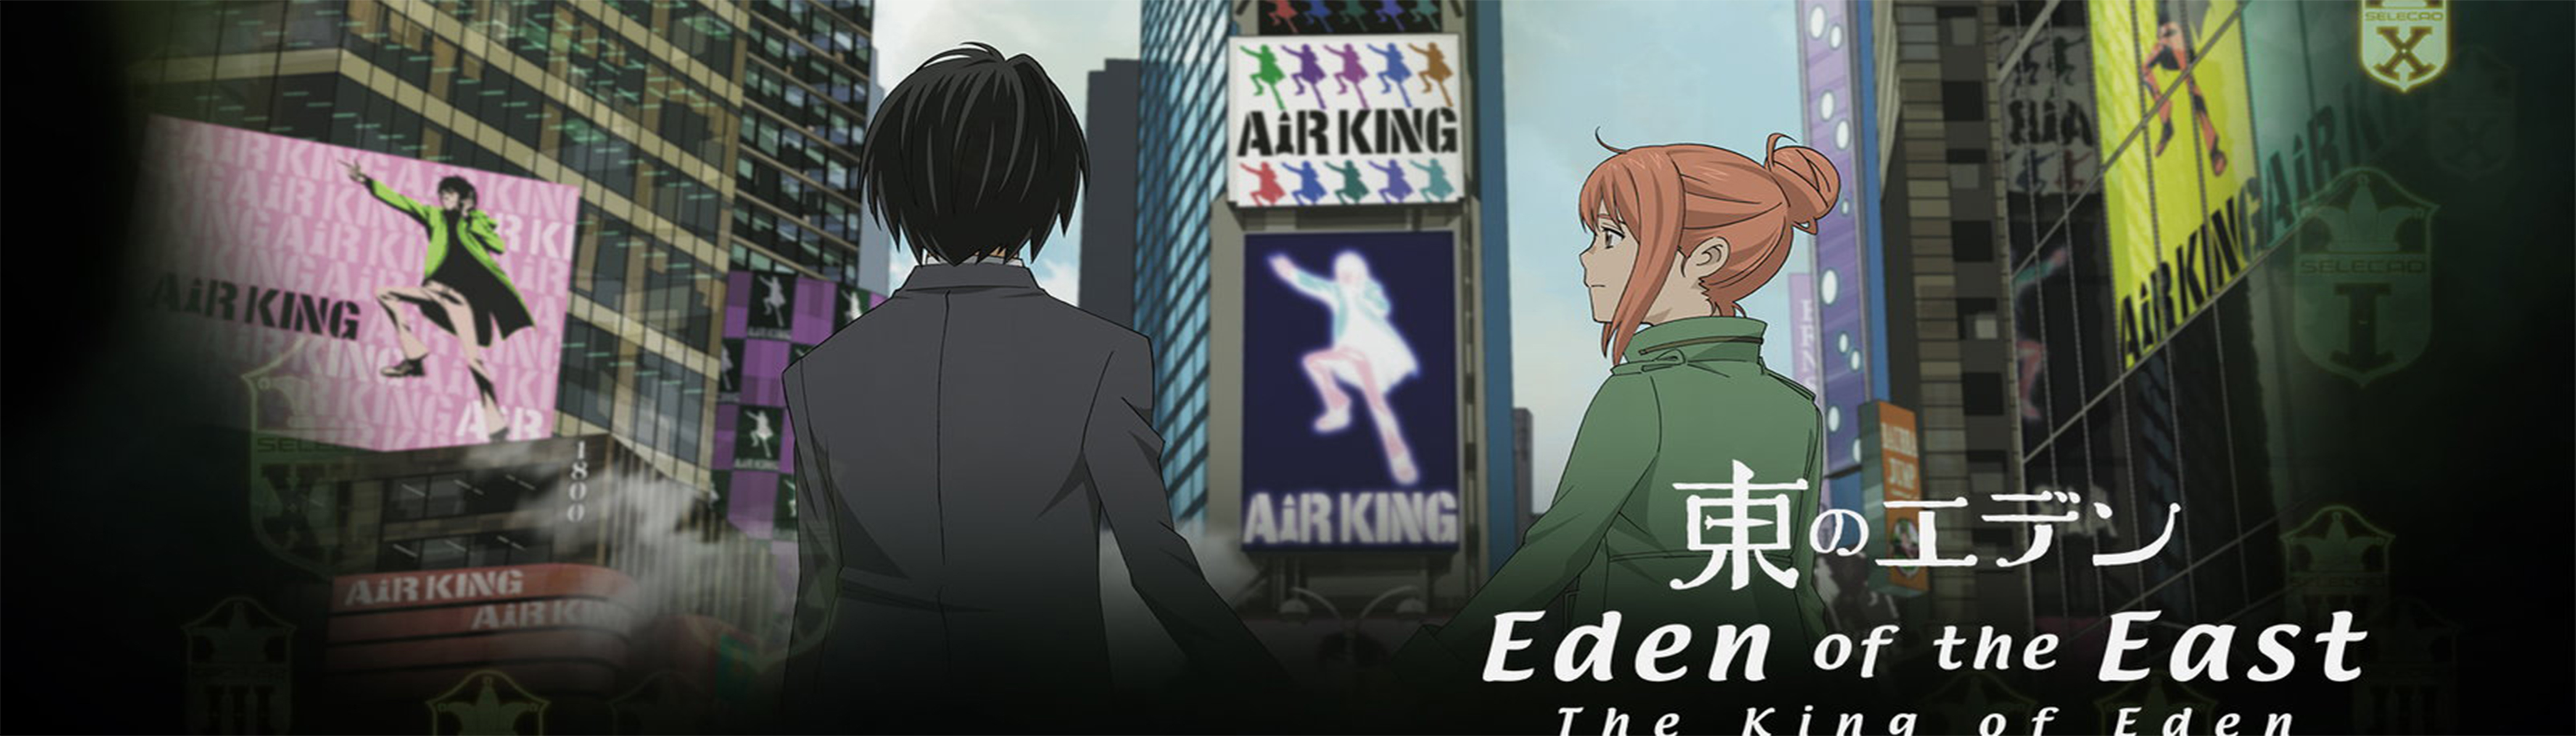 Eden Of The East Movie I The King Of Eden دانلود انیمه کارتونی Eden of the East Movie I The King of Edenدانلود فارسی